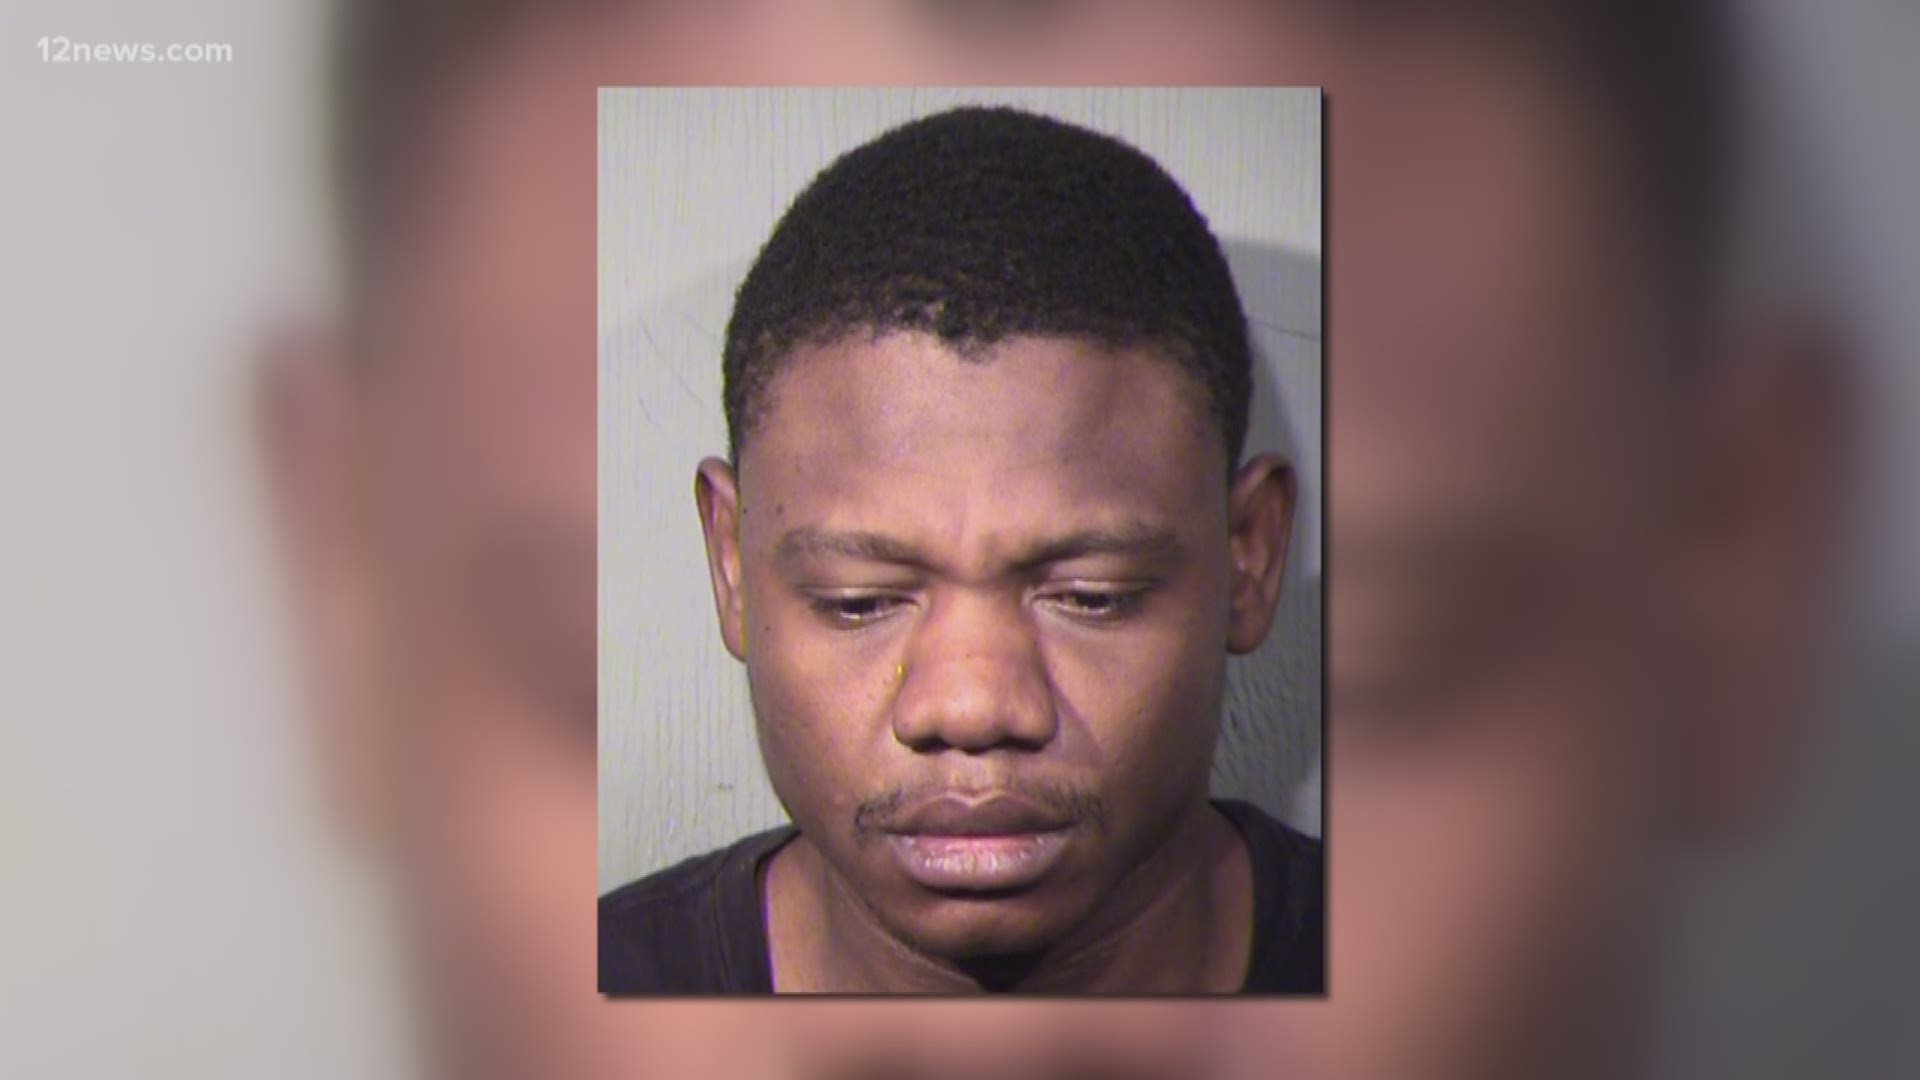 Phoenix police say Zackaria Mohamud Mudasir was spotted in a "no trespassing" area at terminal two. He was even able to open an emergency escape slide on a United Airlines plane. He was arrested for trespassing.